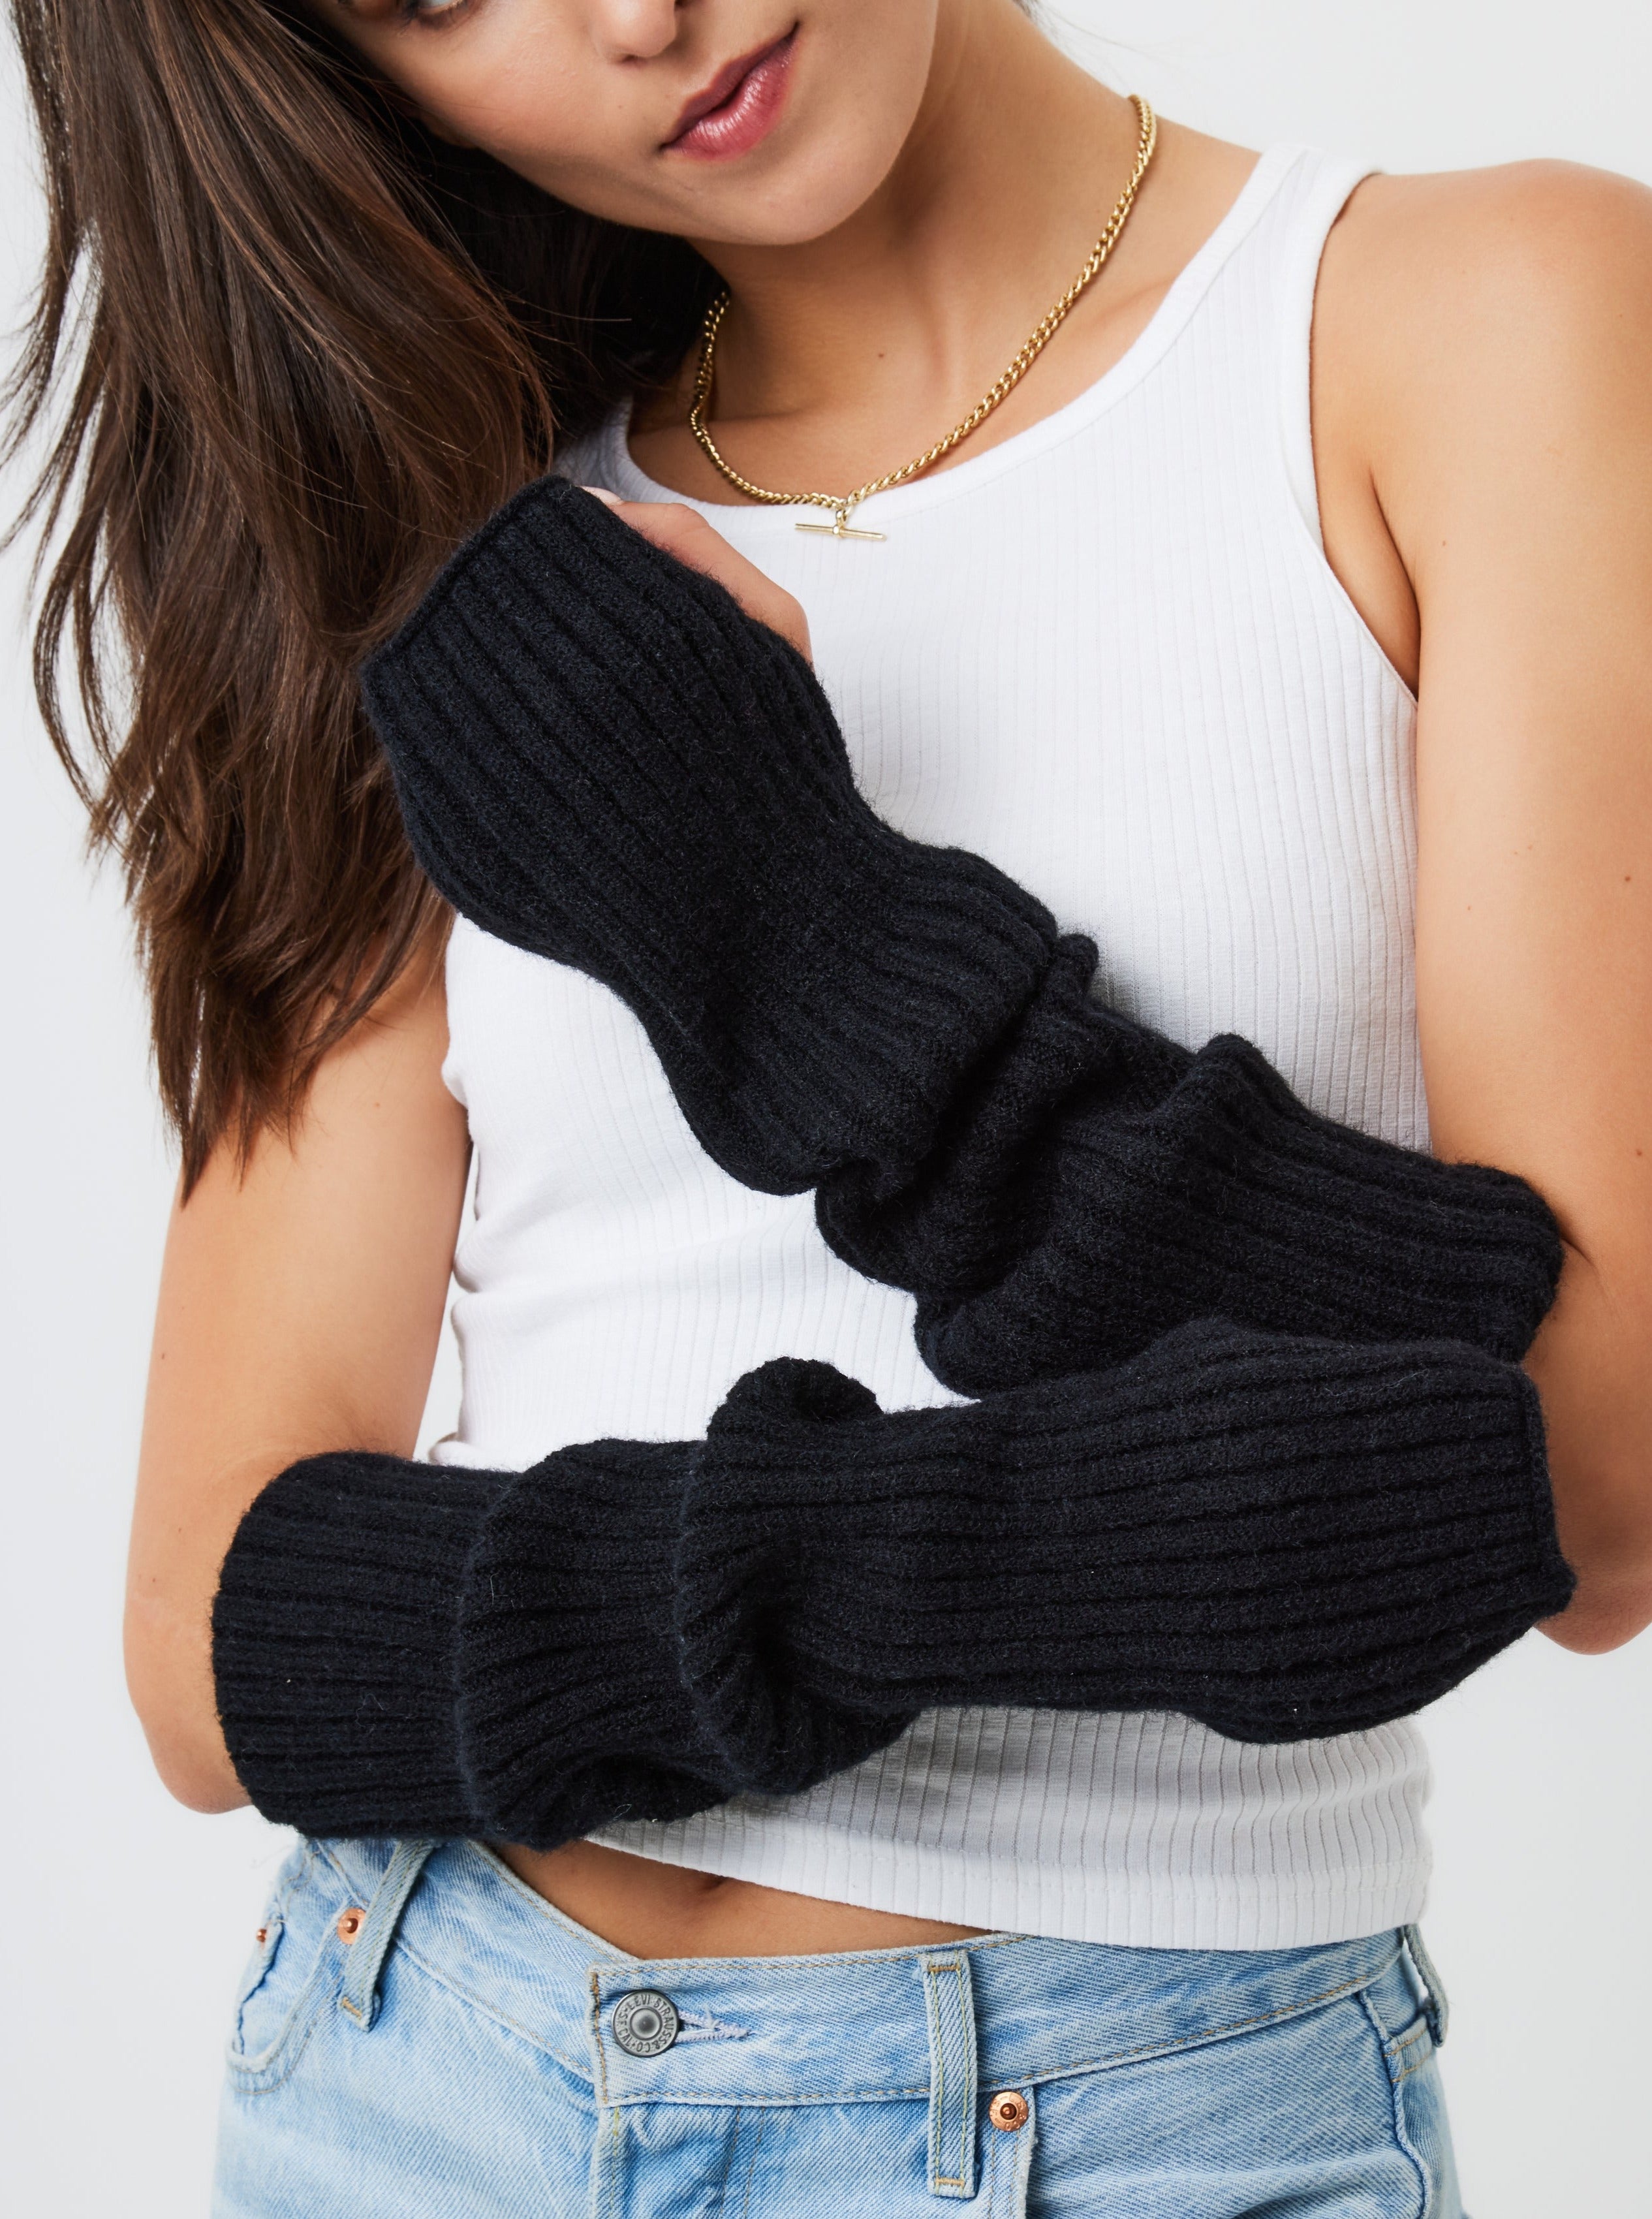 Knitted Arm Warmers in Black | fingerless gloves | Knitwear | ribbed | y2k | Grunge | Grunge sleaze | ballet core | elevated indie | e girl | Accessories | accessory | winter | Autumn | retro | 90s